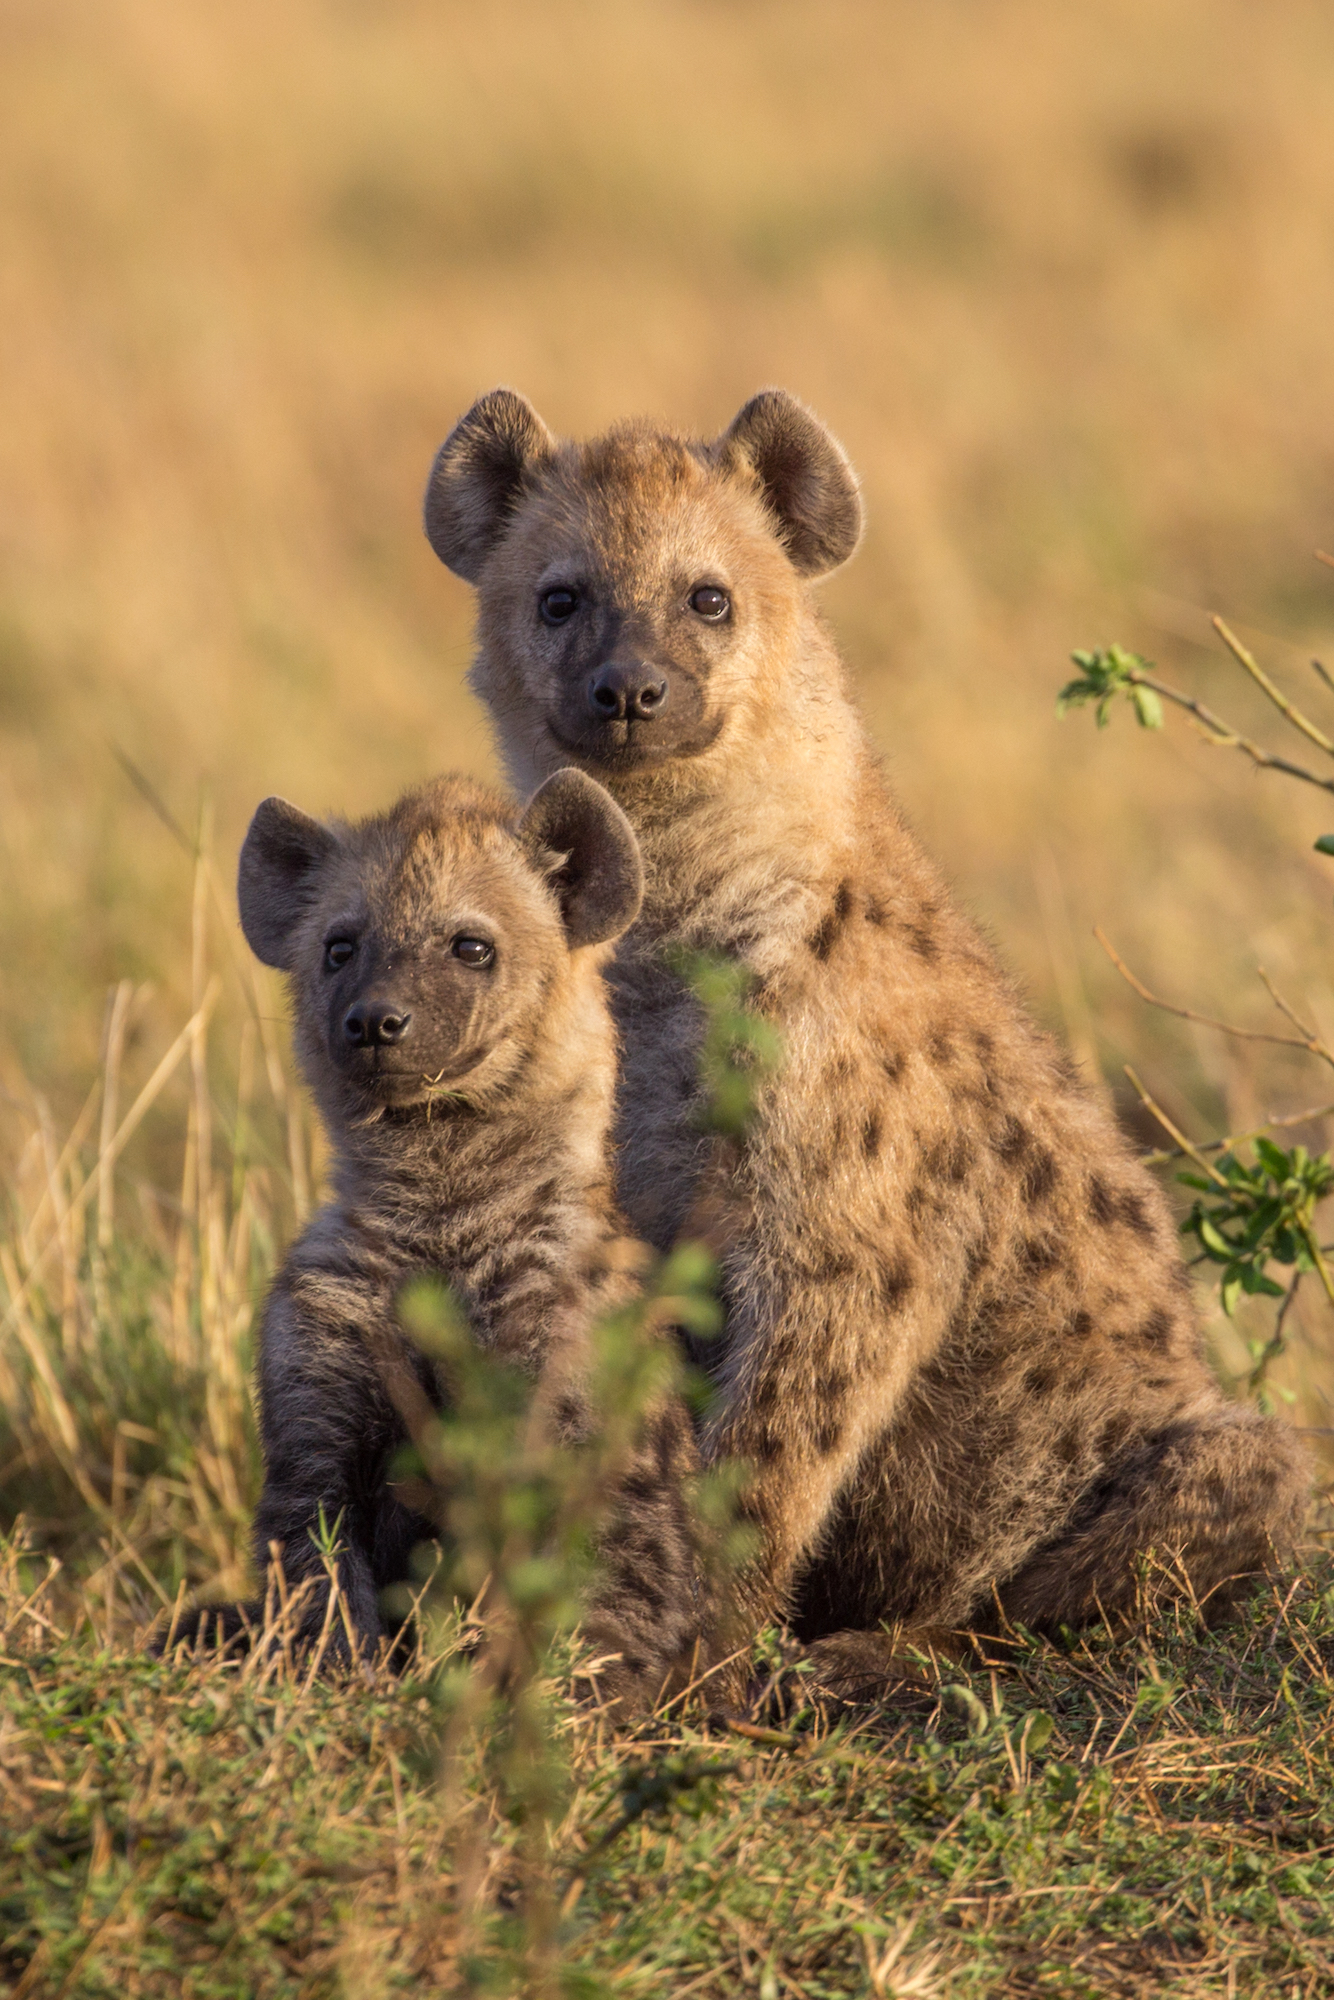 A mother hyena with her cub